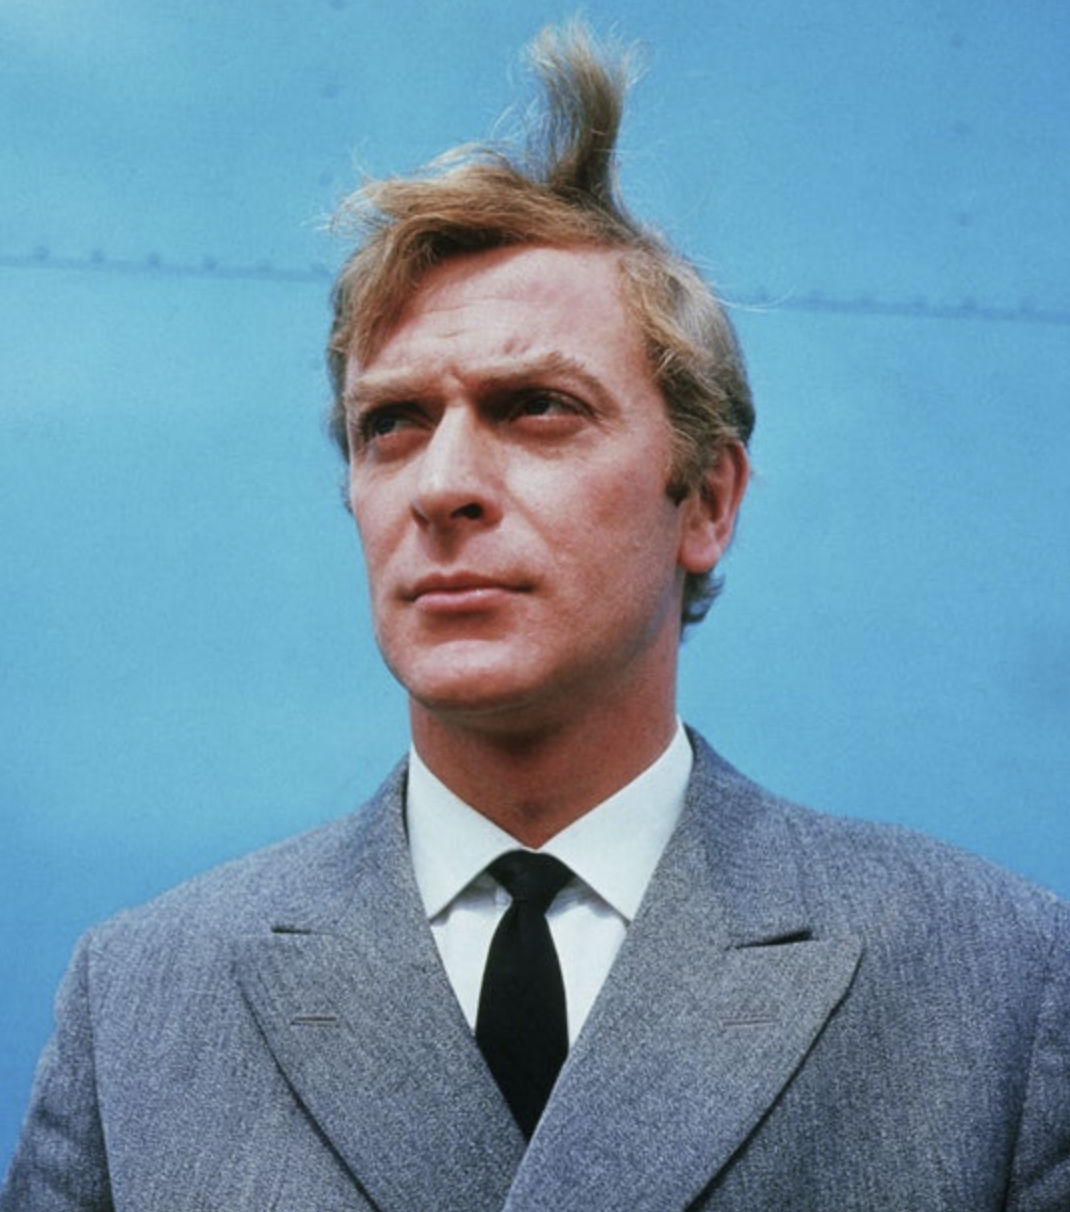 Michael Caine in a grey suit in 1965